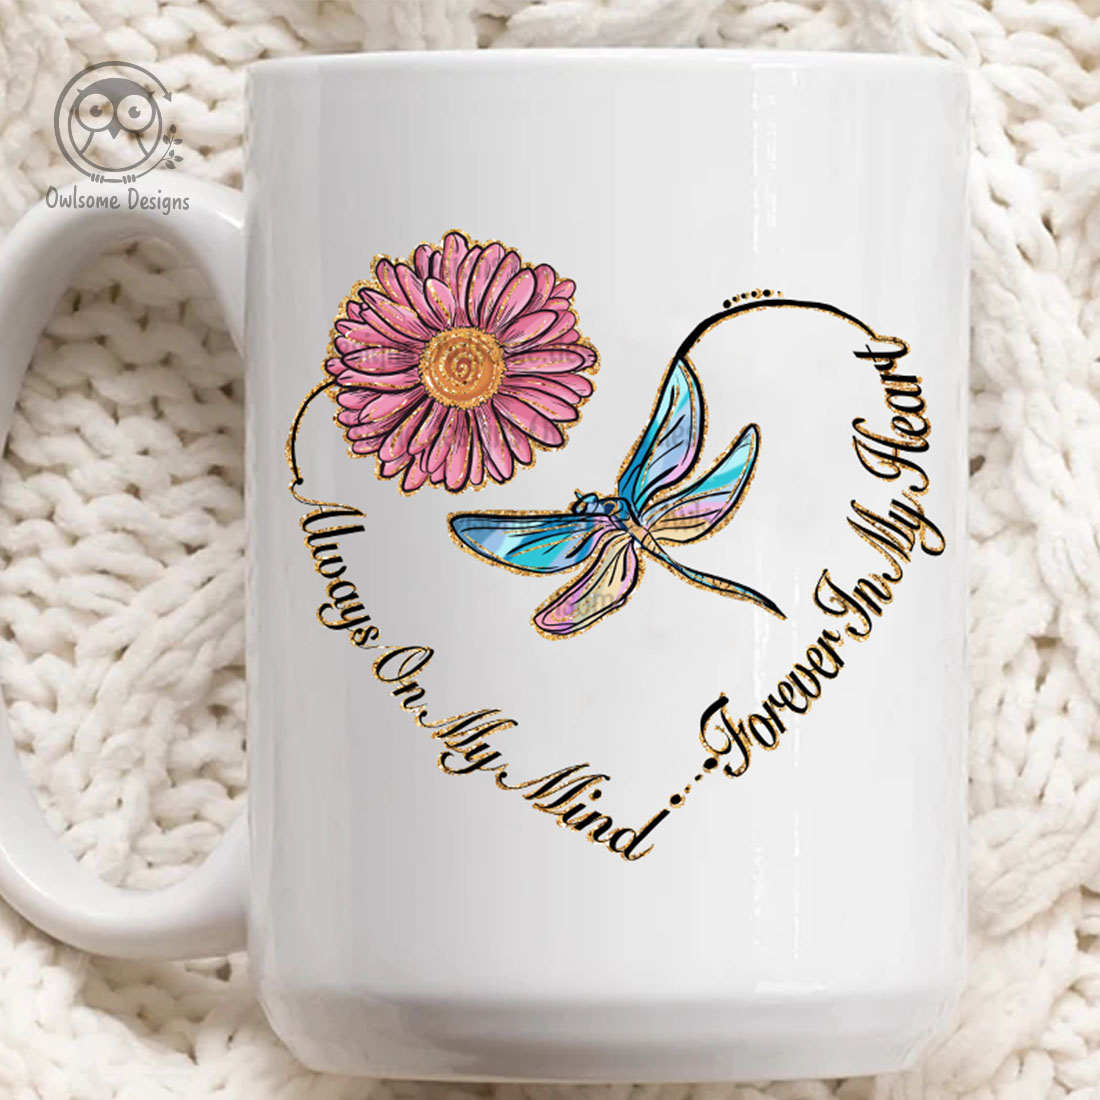 Image of a cup with beautiful dragonfly print and heart shaped flower.